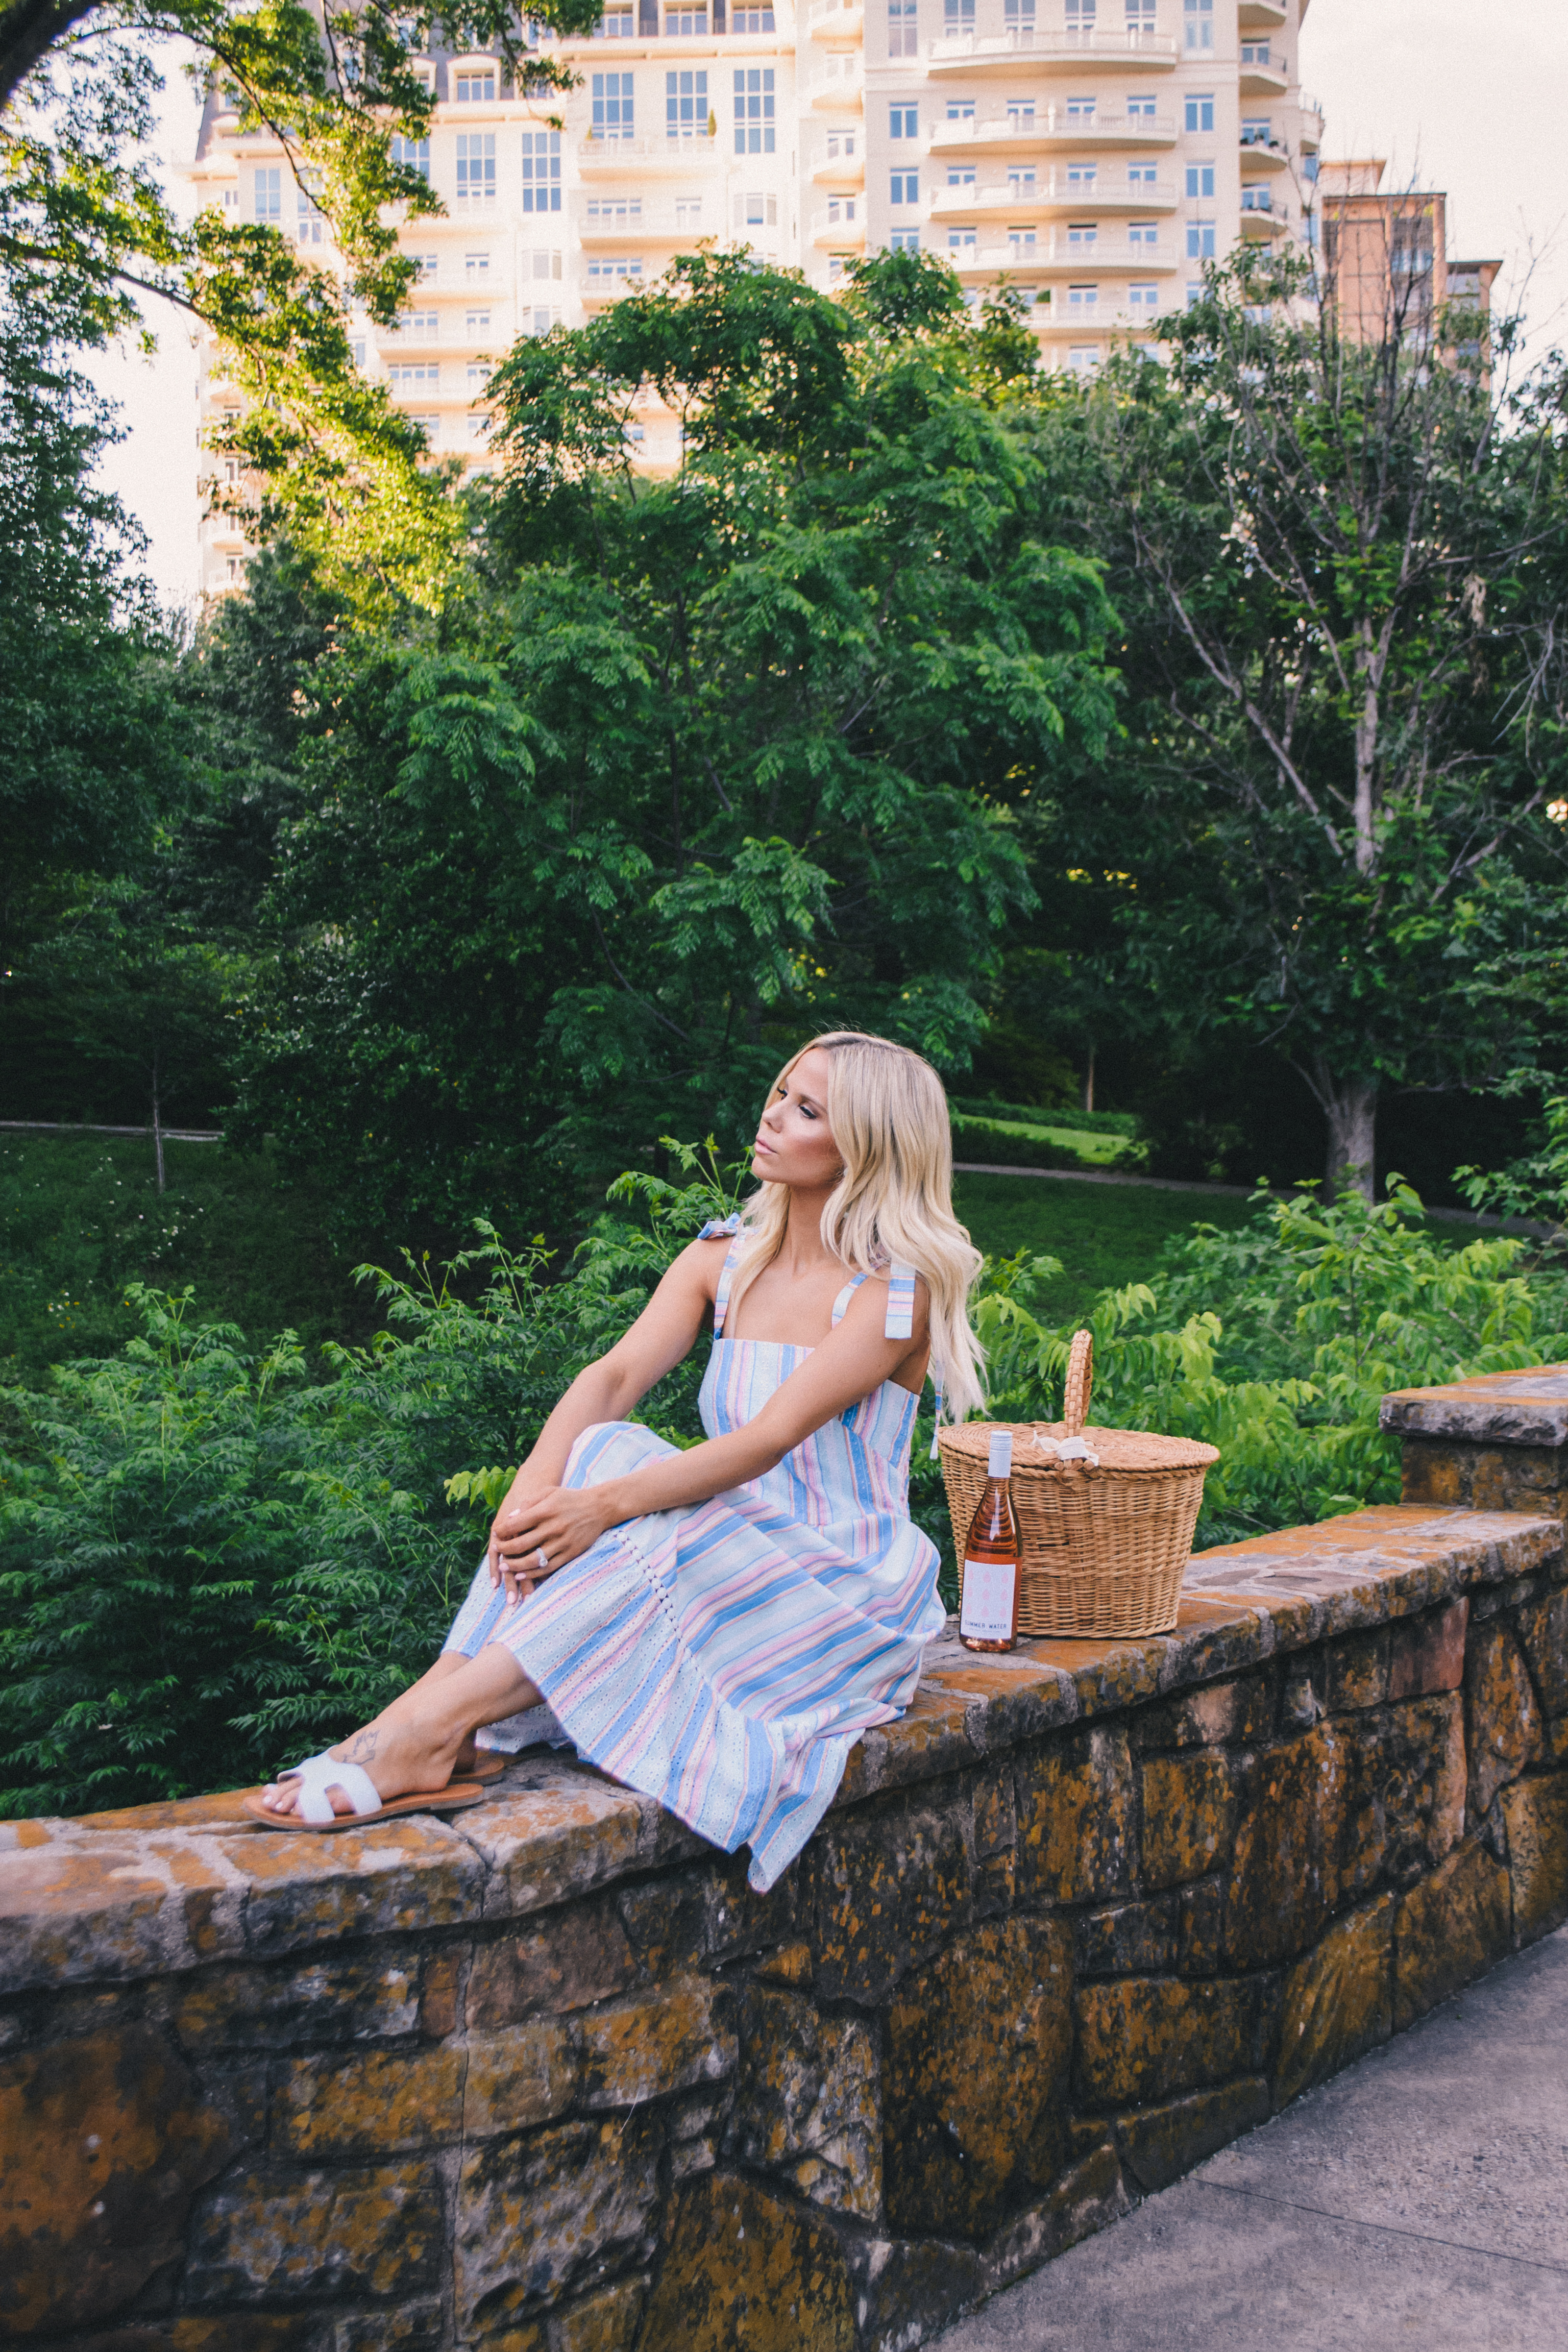 Shoshanna Demeri Dress, striped maxi dress, picnic outfit, picnic dress, summer 2019 fashion, summer 2019 outfit, glam life living, Hannah McDonnell #maxidress #summeroutfit #summerstyle